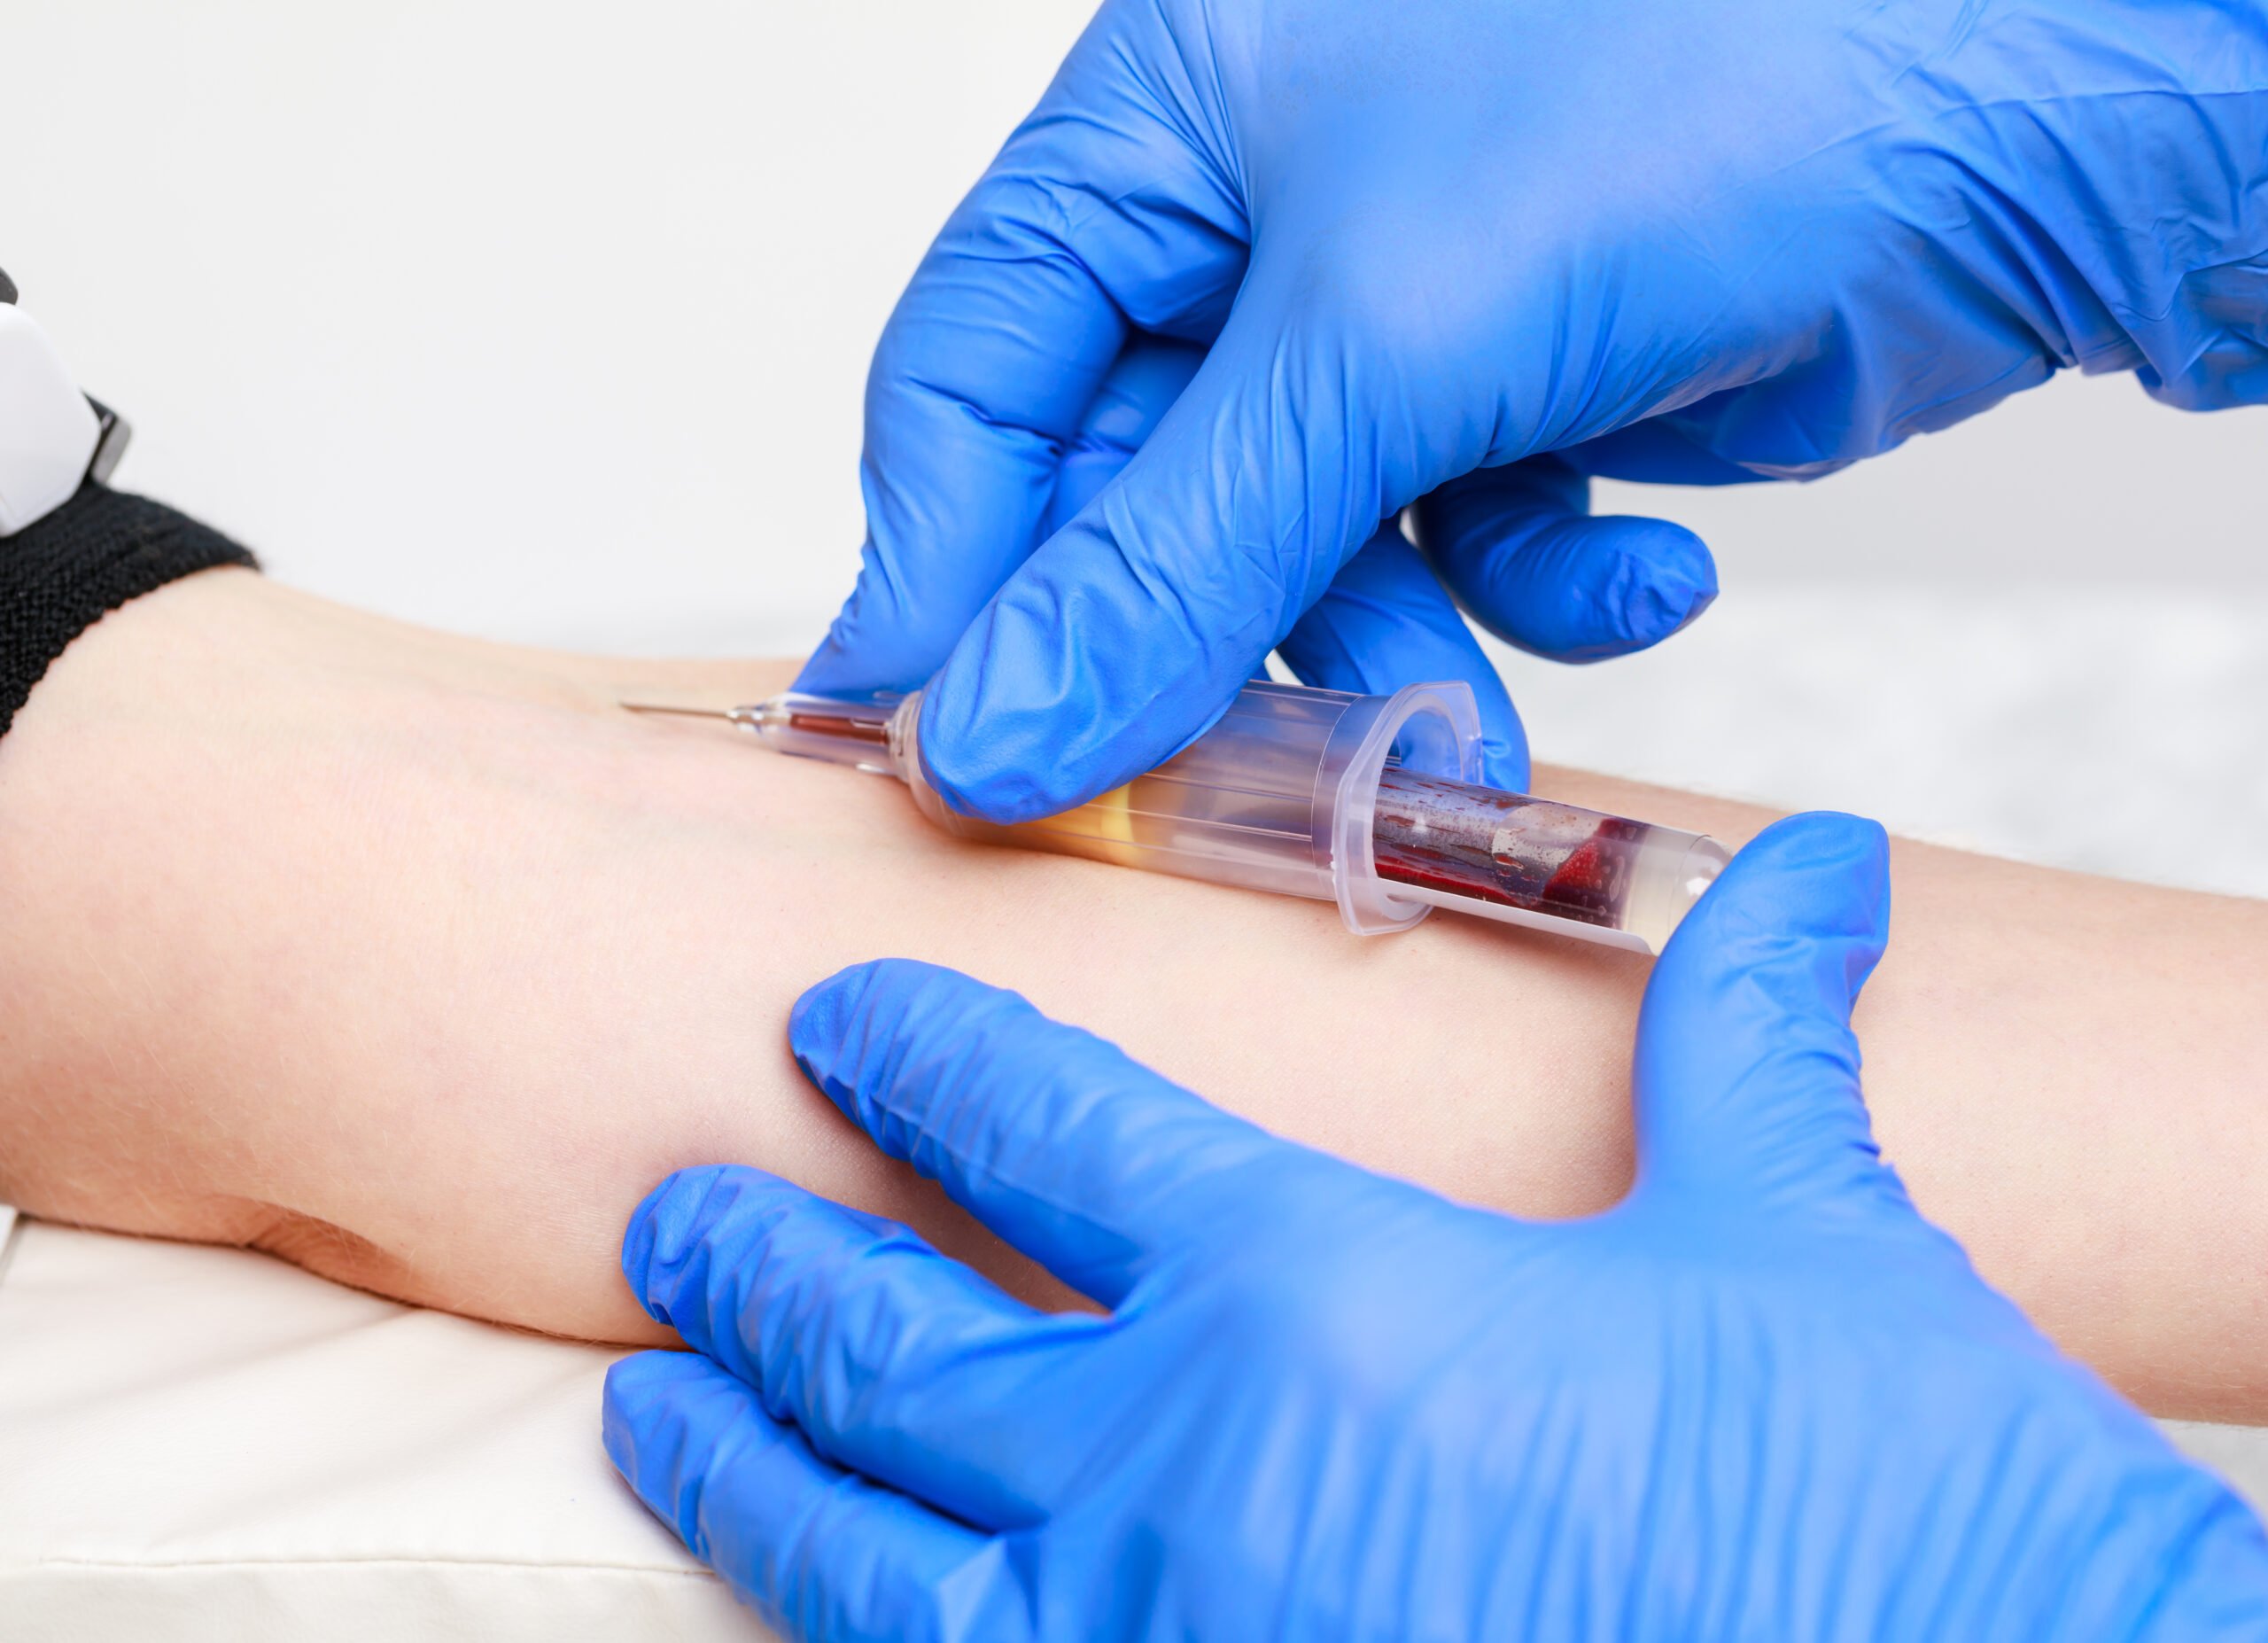 An Understanding of Venepuncture (Adult or Child as applicable)